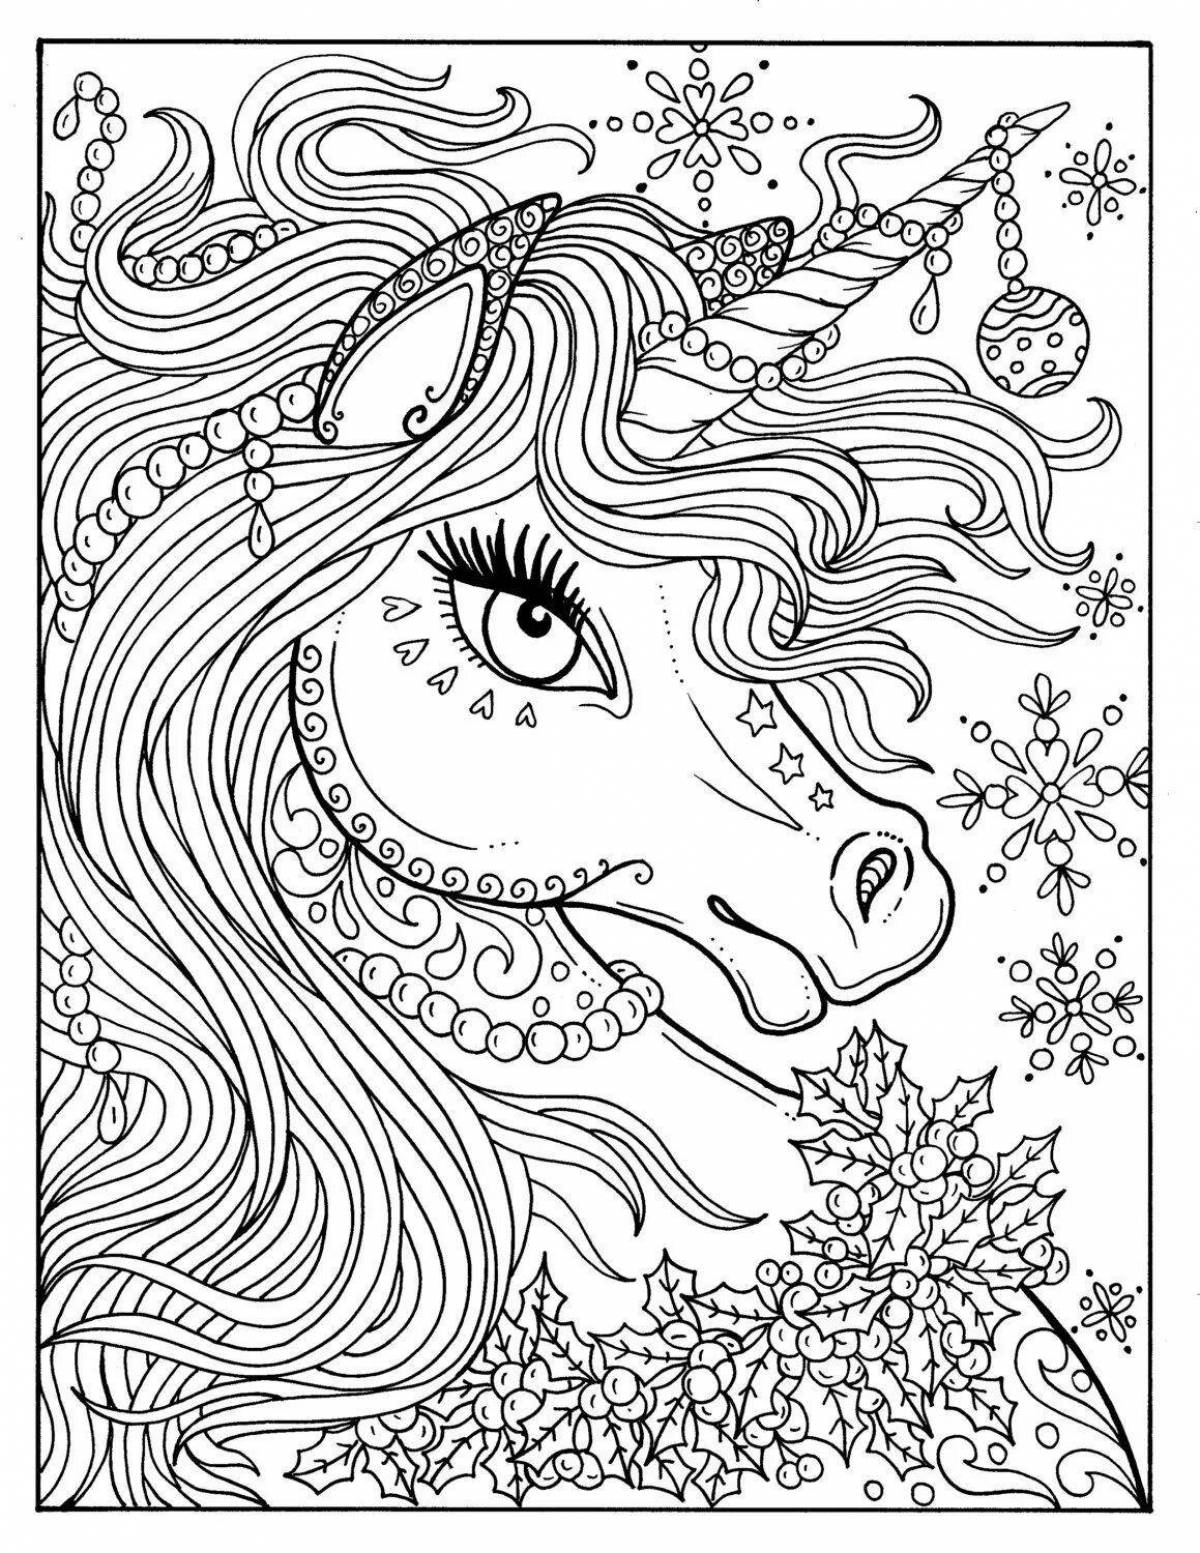 A fascinating coloring book for girls 12 years old